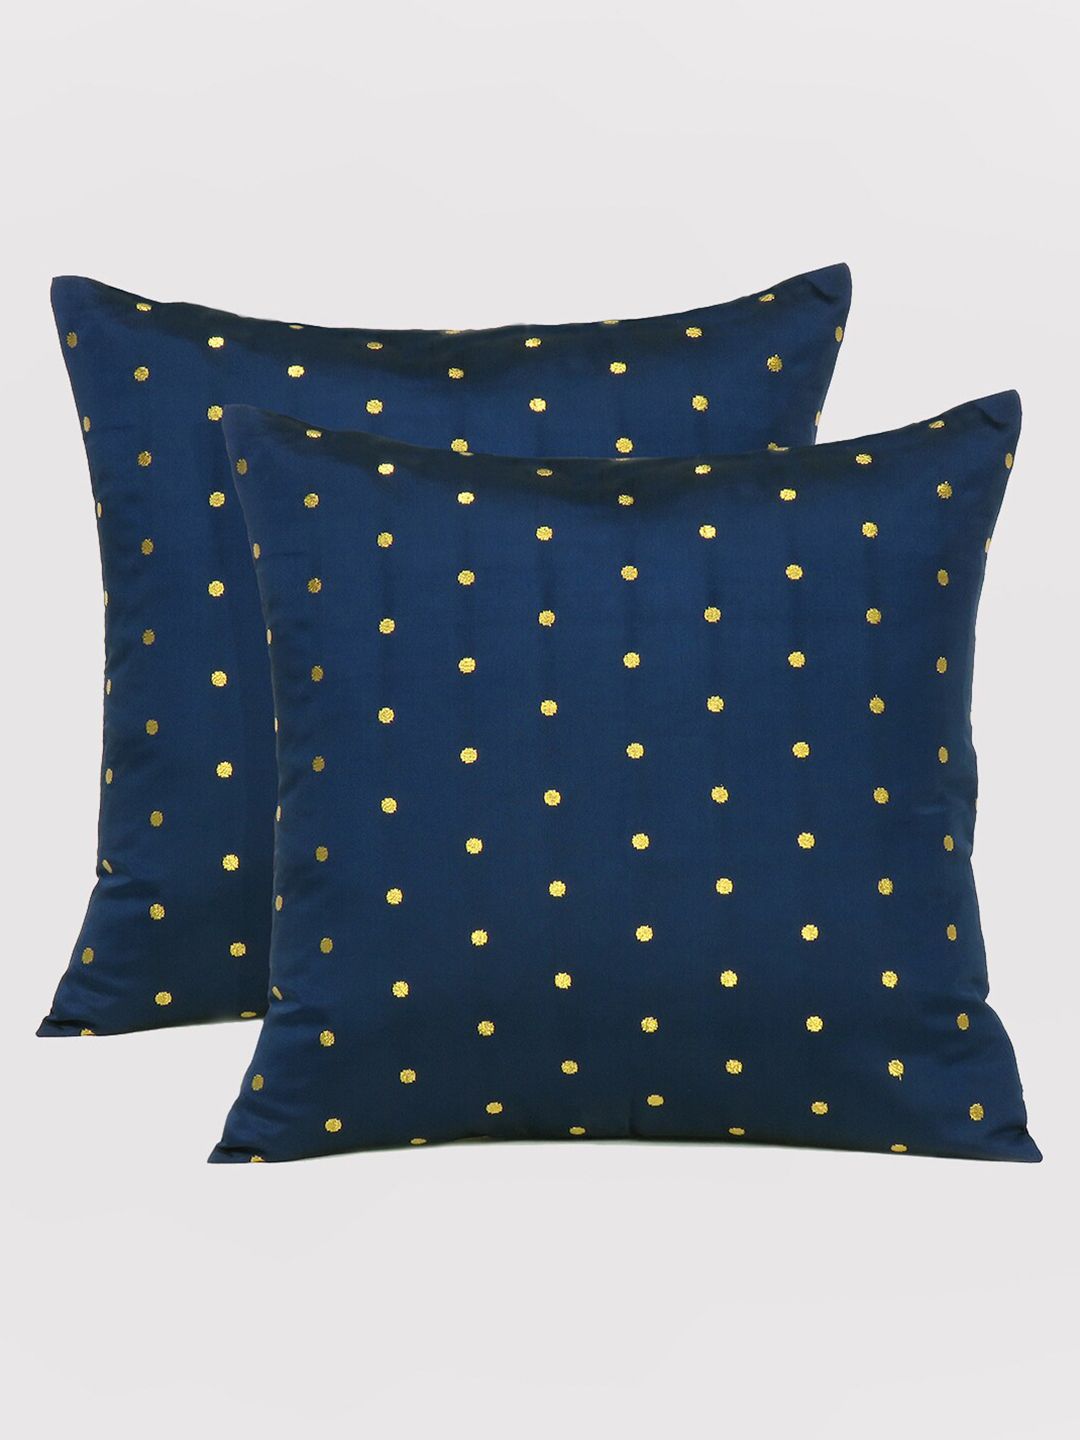 OUSSUM Set of 2 Navy Blue & Gold-Toned  Square Cushion Covers Price in India